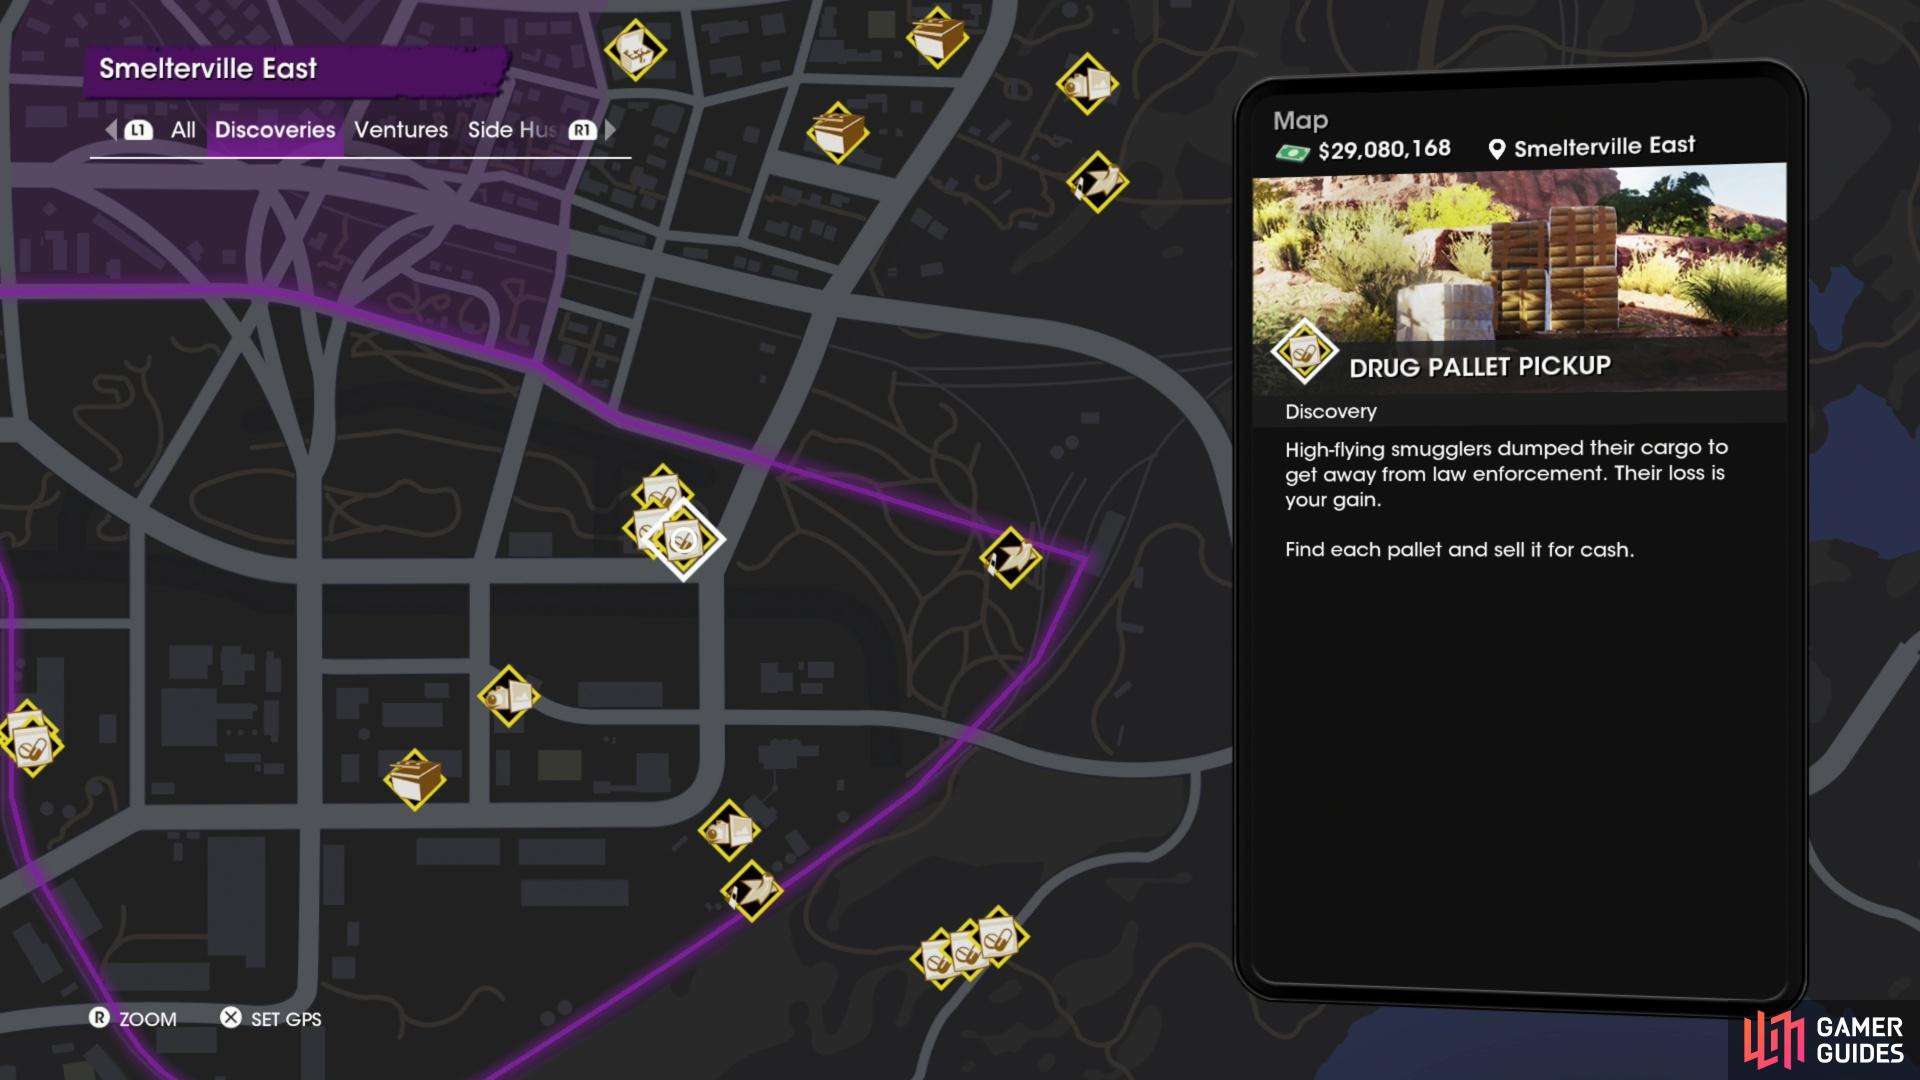 Look for Drug Pallet Pickup Discoveries on the map - they tend to come in clusters.